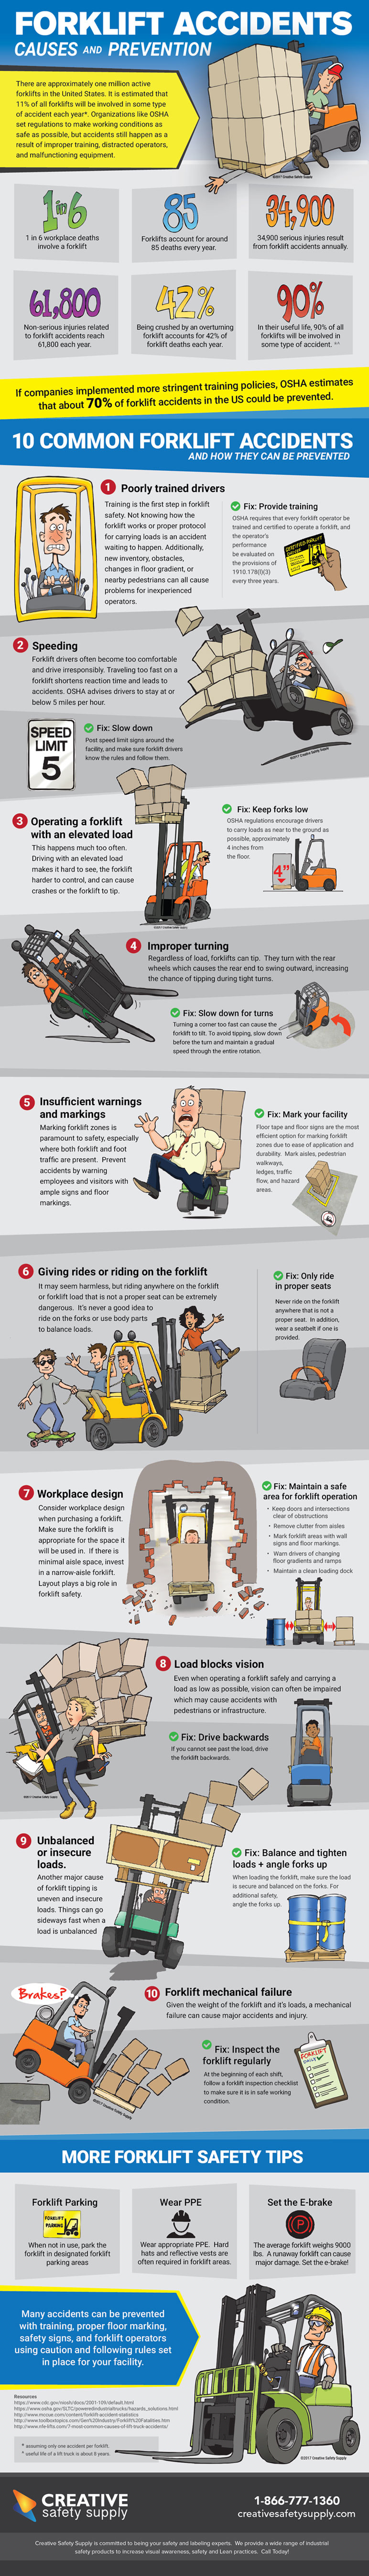 Forklift Accidents - Causes and Prevention